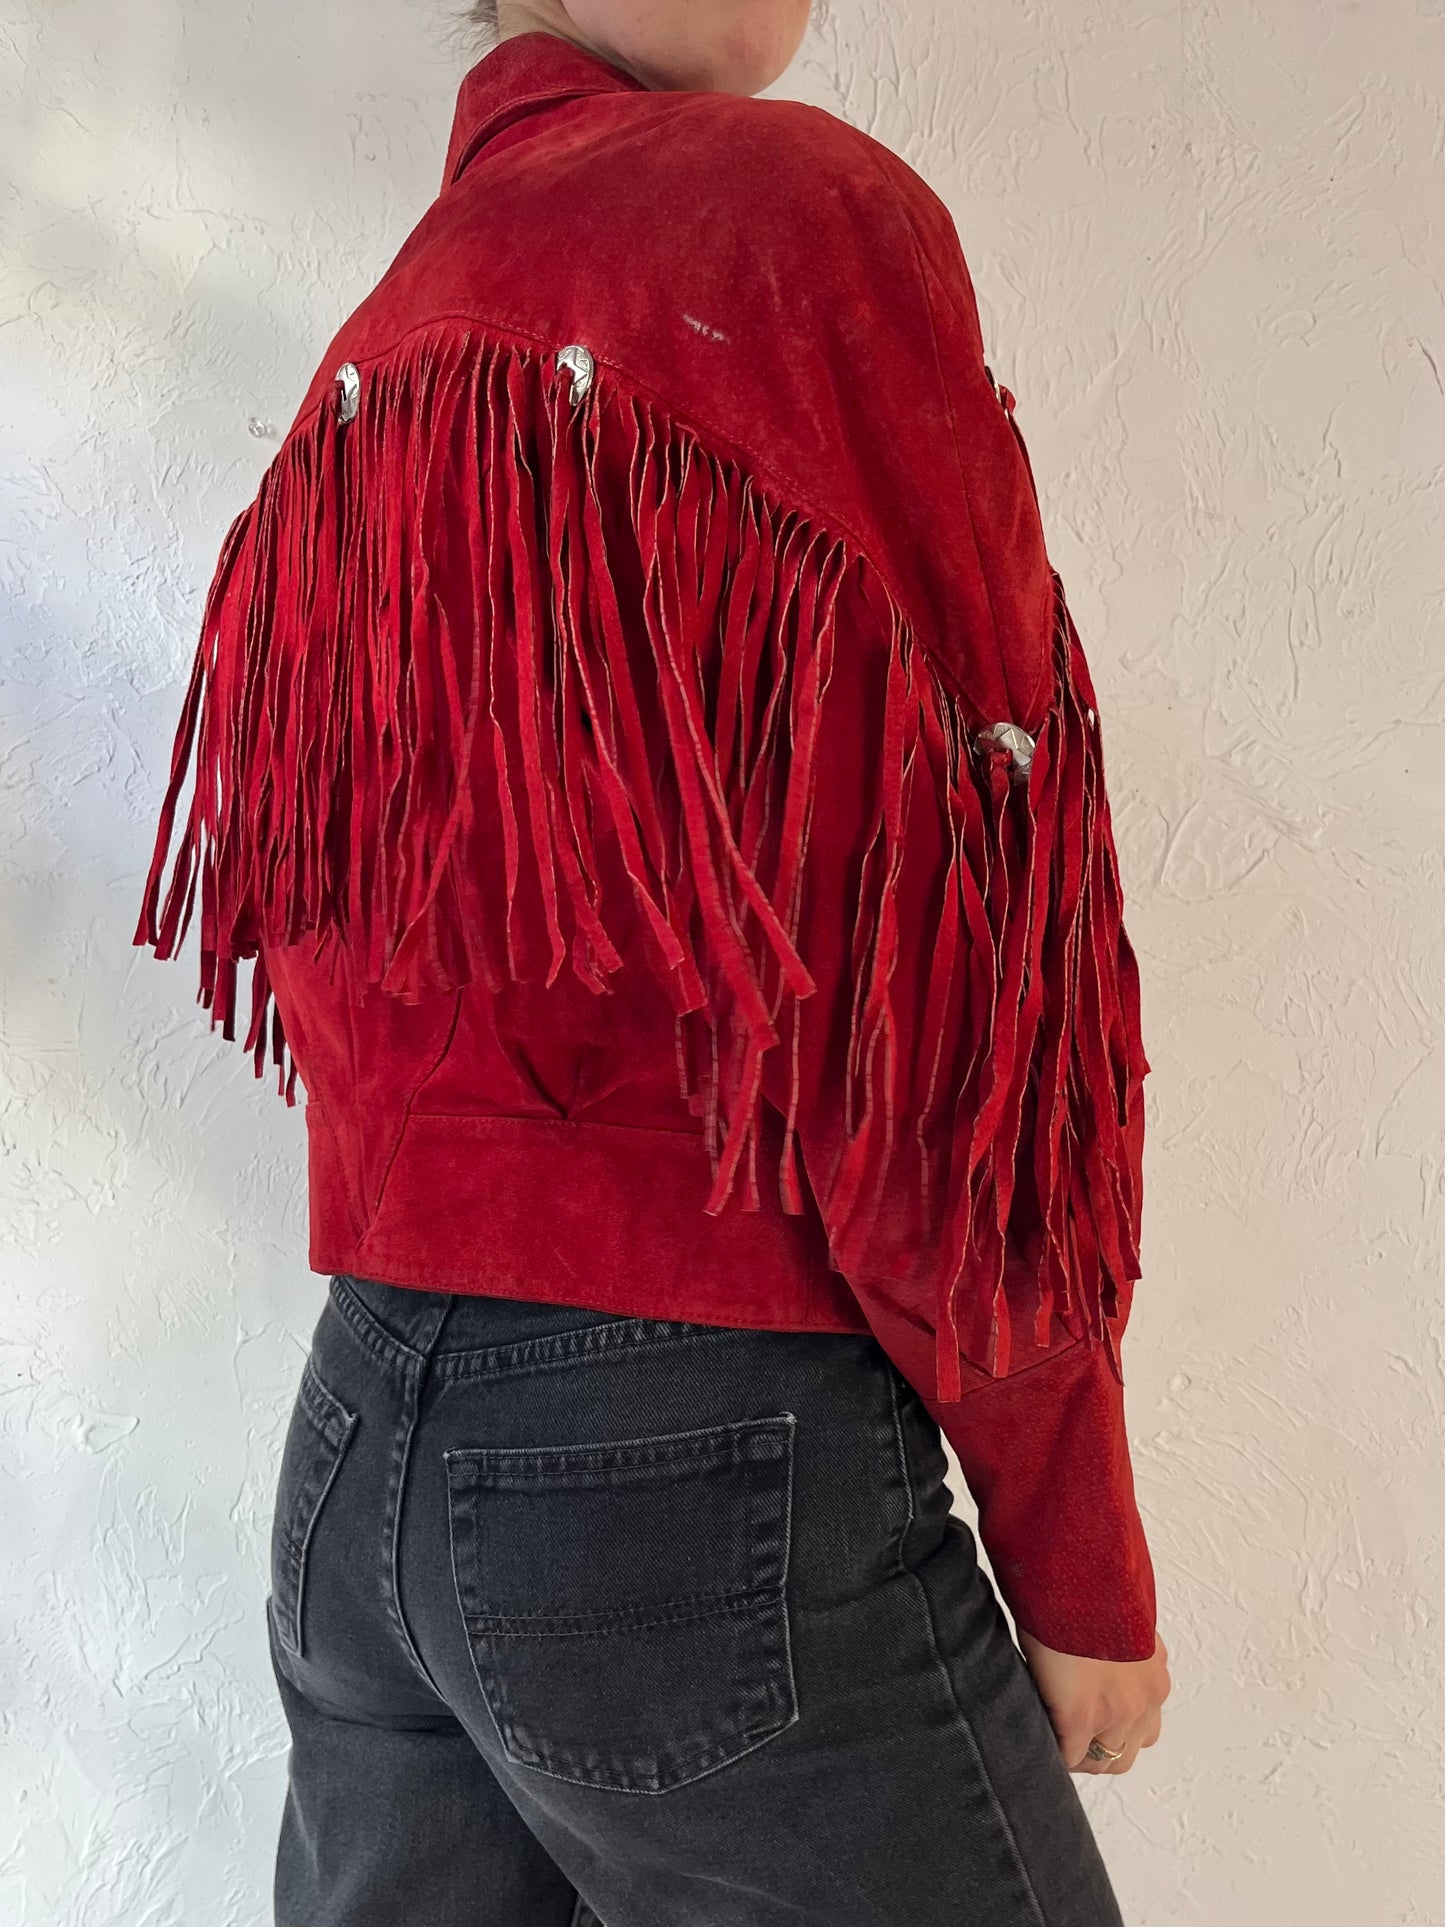 80s 'Outerbound' Red Suede Leather Fringe Jacket / Large